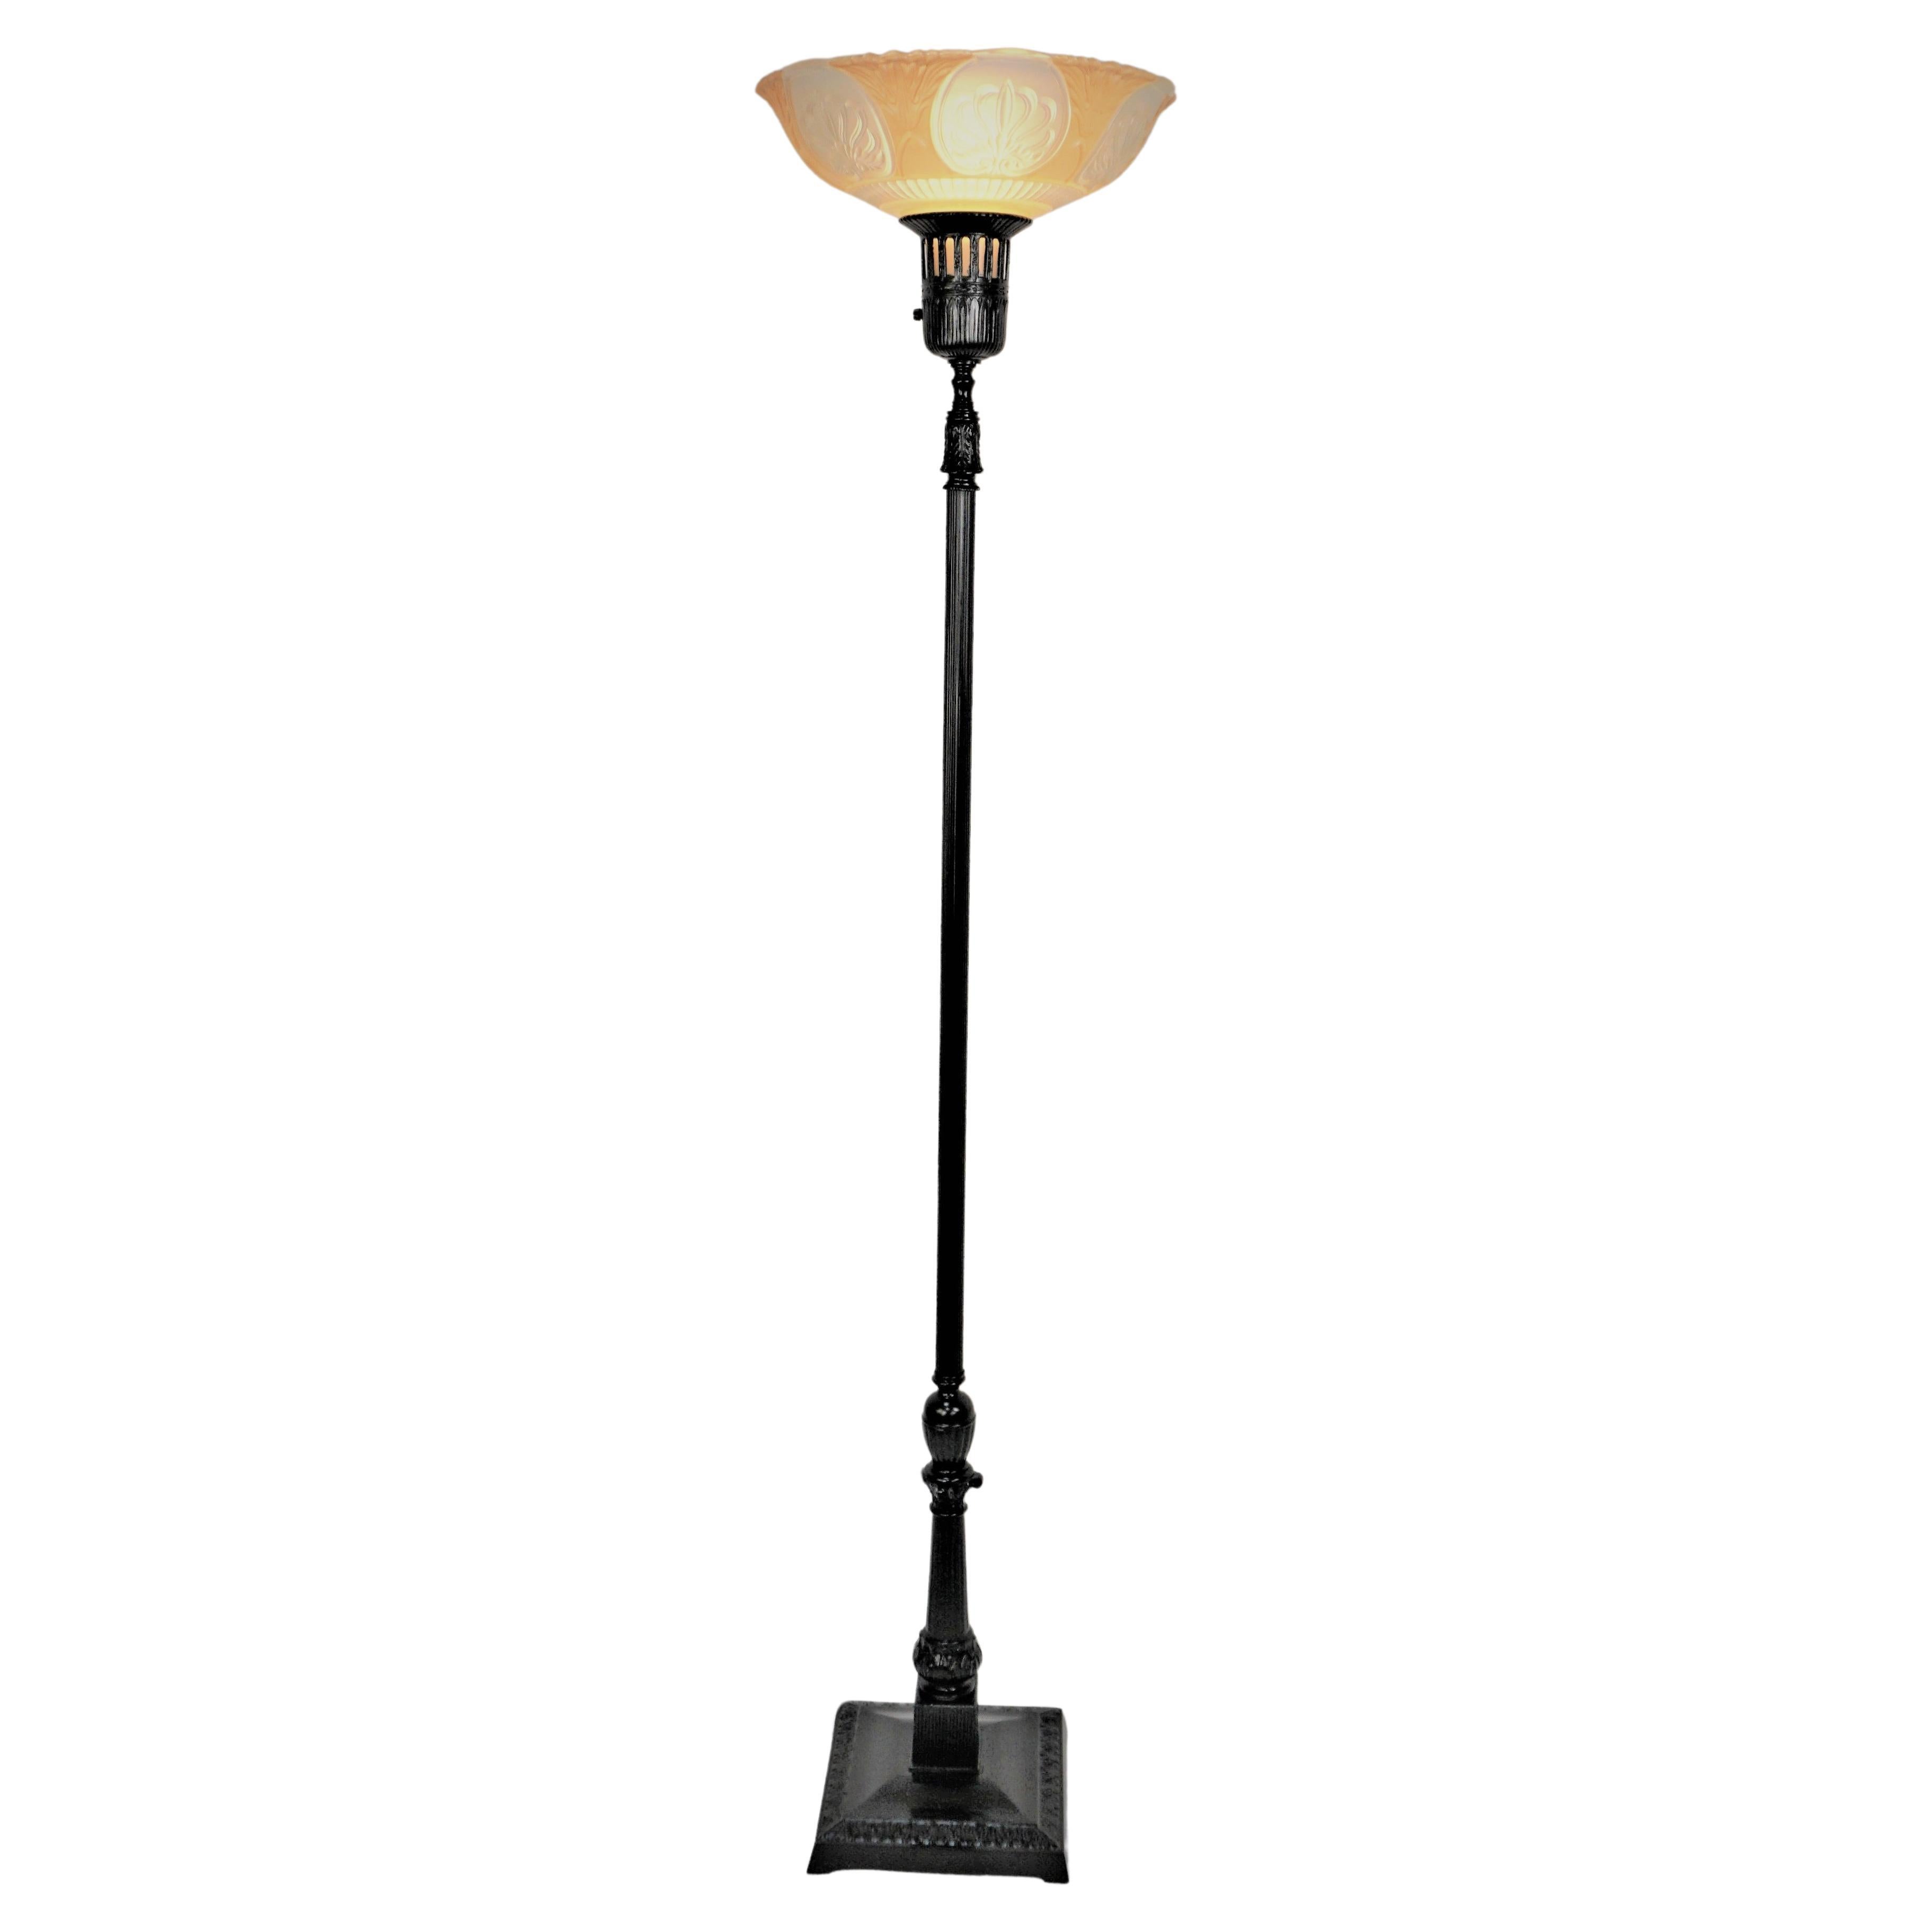 American 1930's Torchiere Floor Lamp with Original Glass Shade